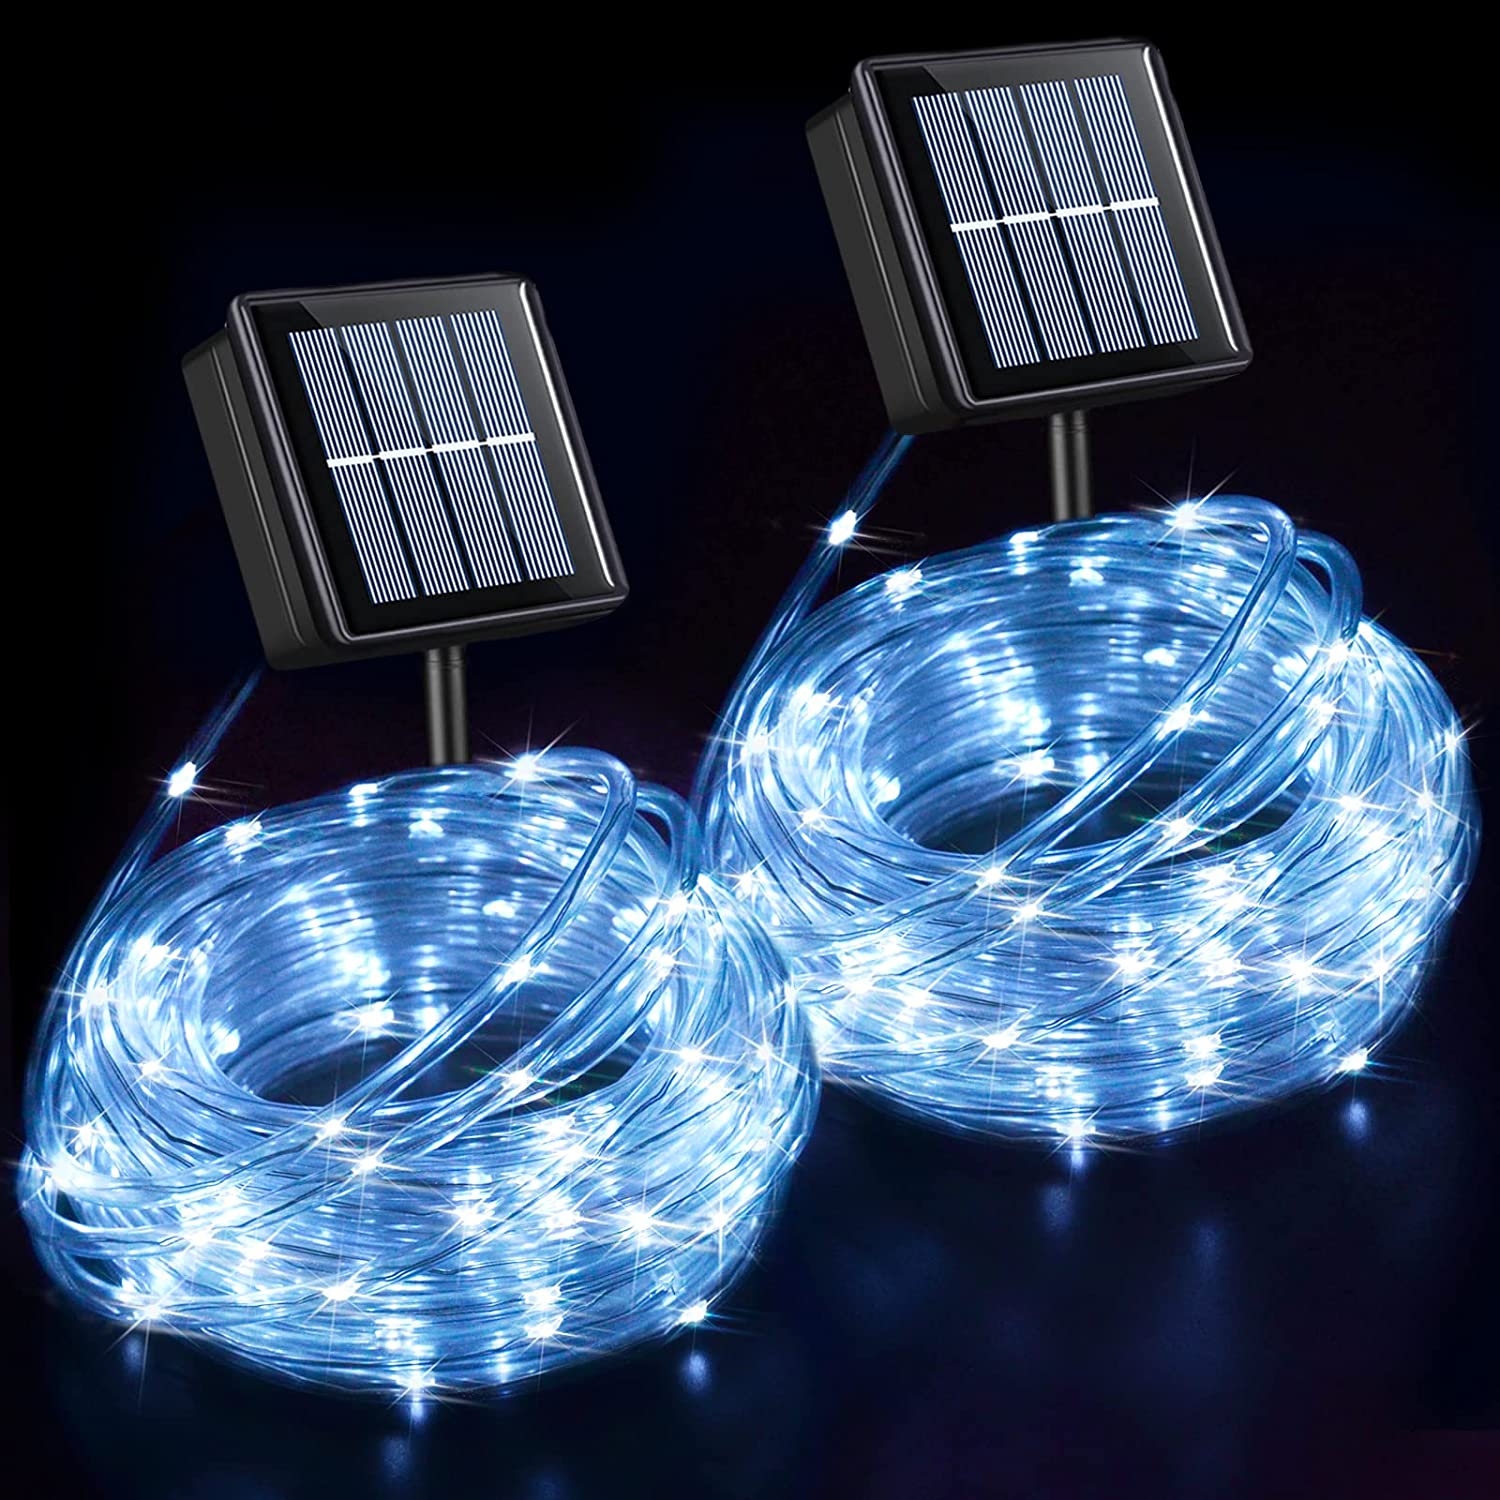 QITONG Solar Rope Lights Outdoor Waterproof LED, 2 Pack Solar Rope Lights White Total 66ft 200 LED, Solar Christmas Lights with PVC Tube Fairy Lights for Xmas Garden Yard Fence Walkway Decoration